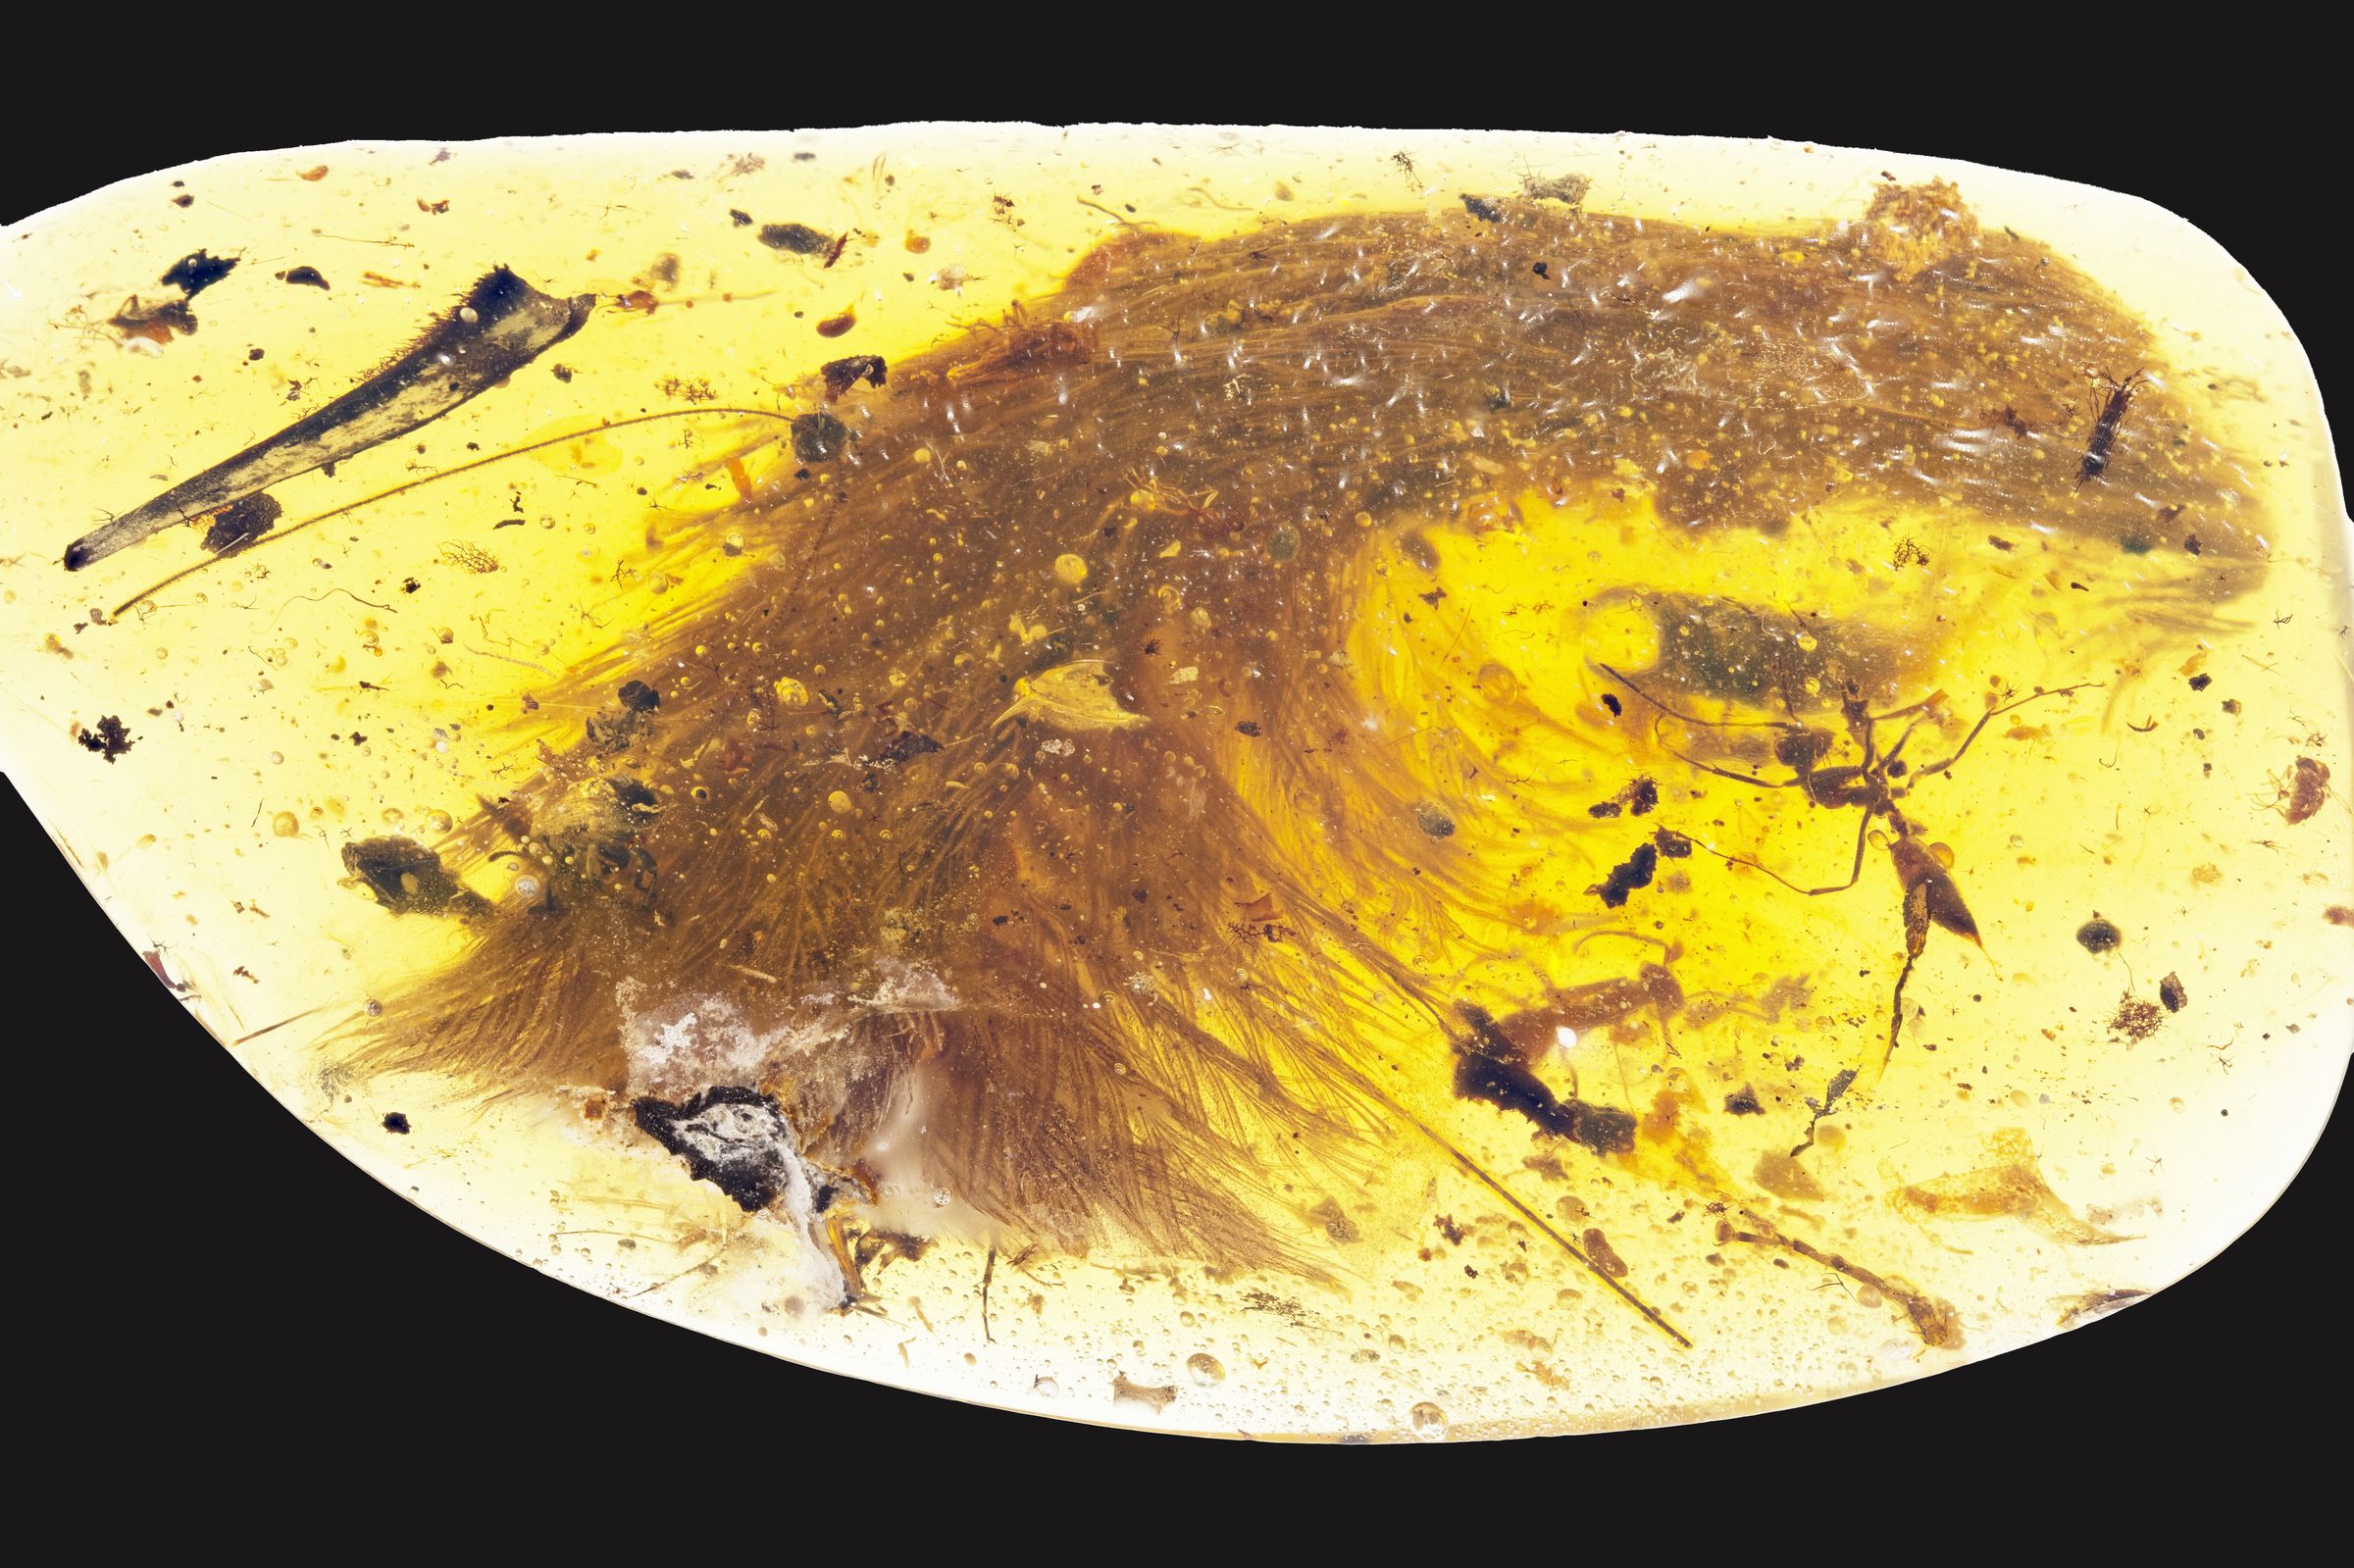 The tip of the tail where it breaches the surface of the amber. The feathers point out to either side of the tail, like a frond. An ant was preserved in the amber as well.